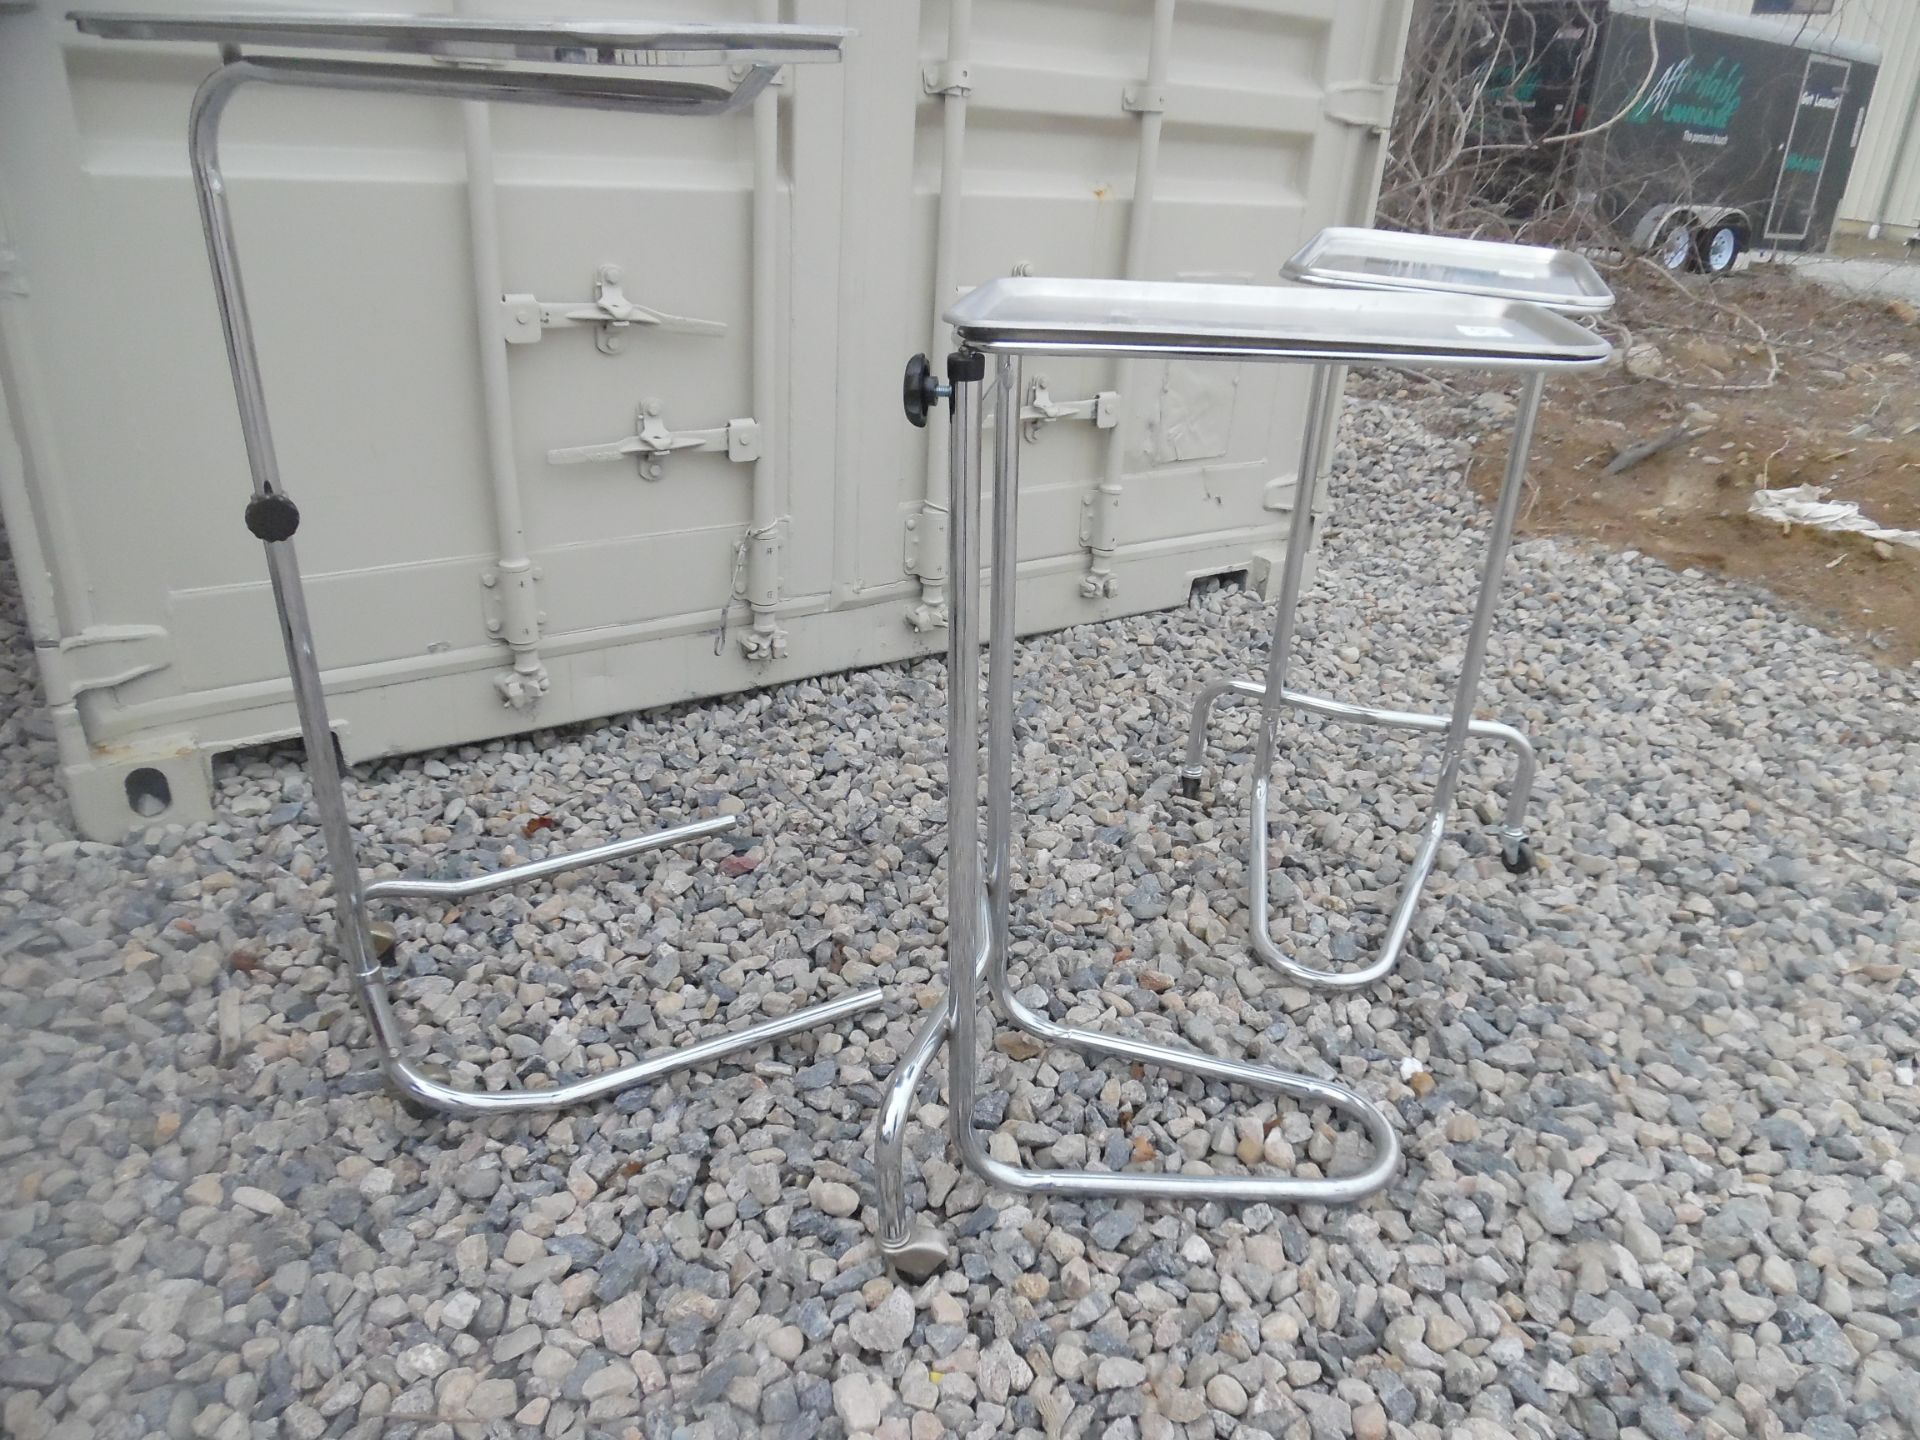 Lot of 3 Medical/surgical stands with trays. - Image 3 of 4